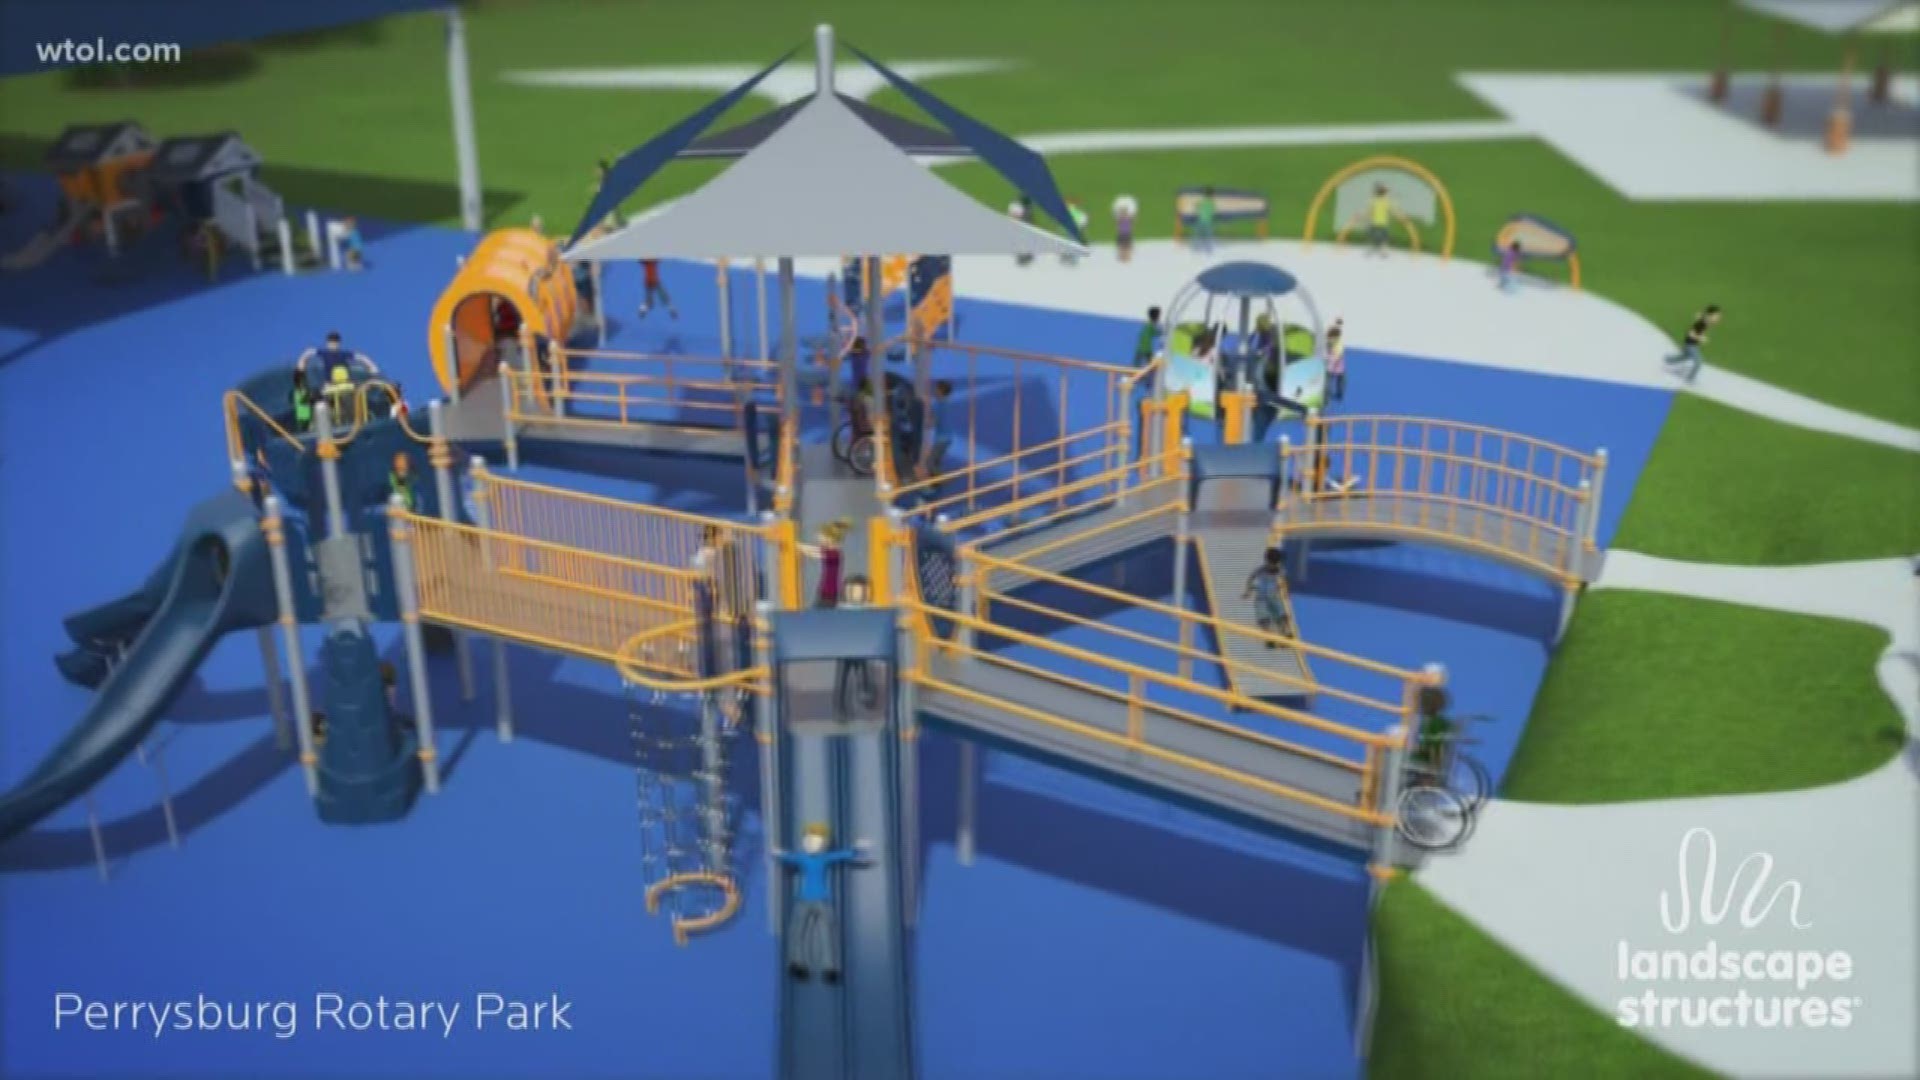 To be built at Rotary Park in Perrysburg, the play space will allow kids of all abilities to play side by side. The playground is in the fundraising stages right now